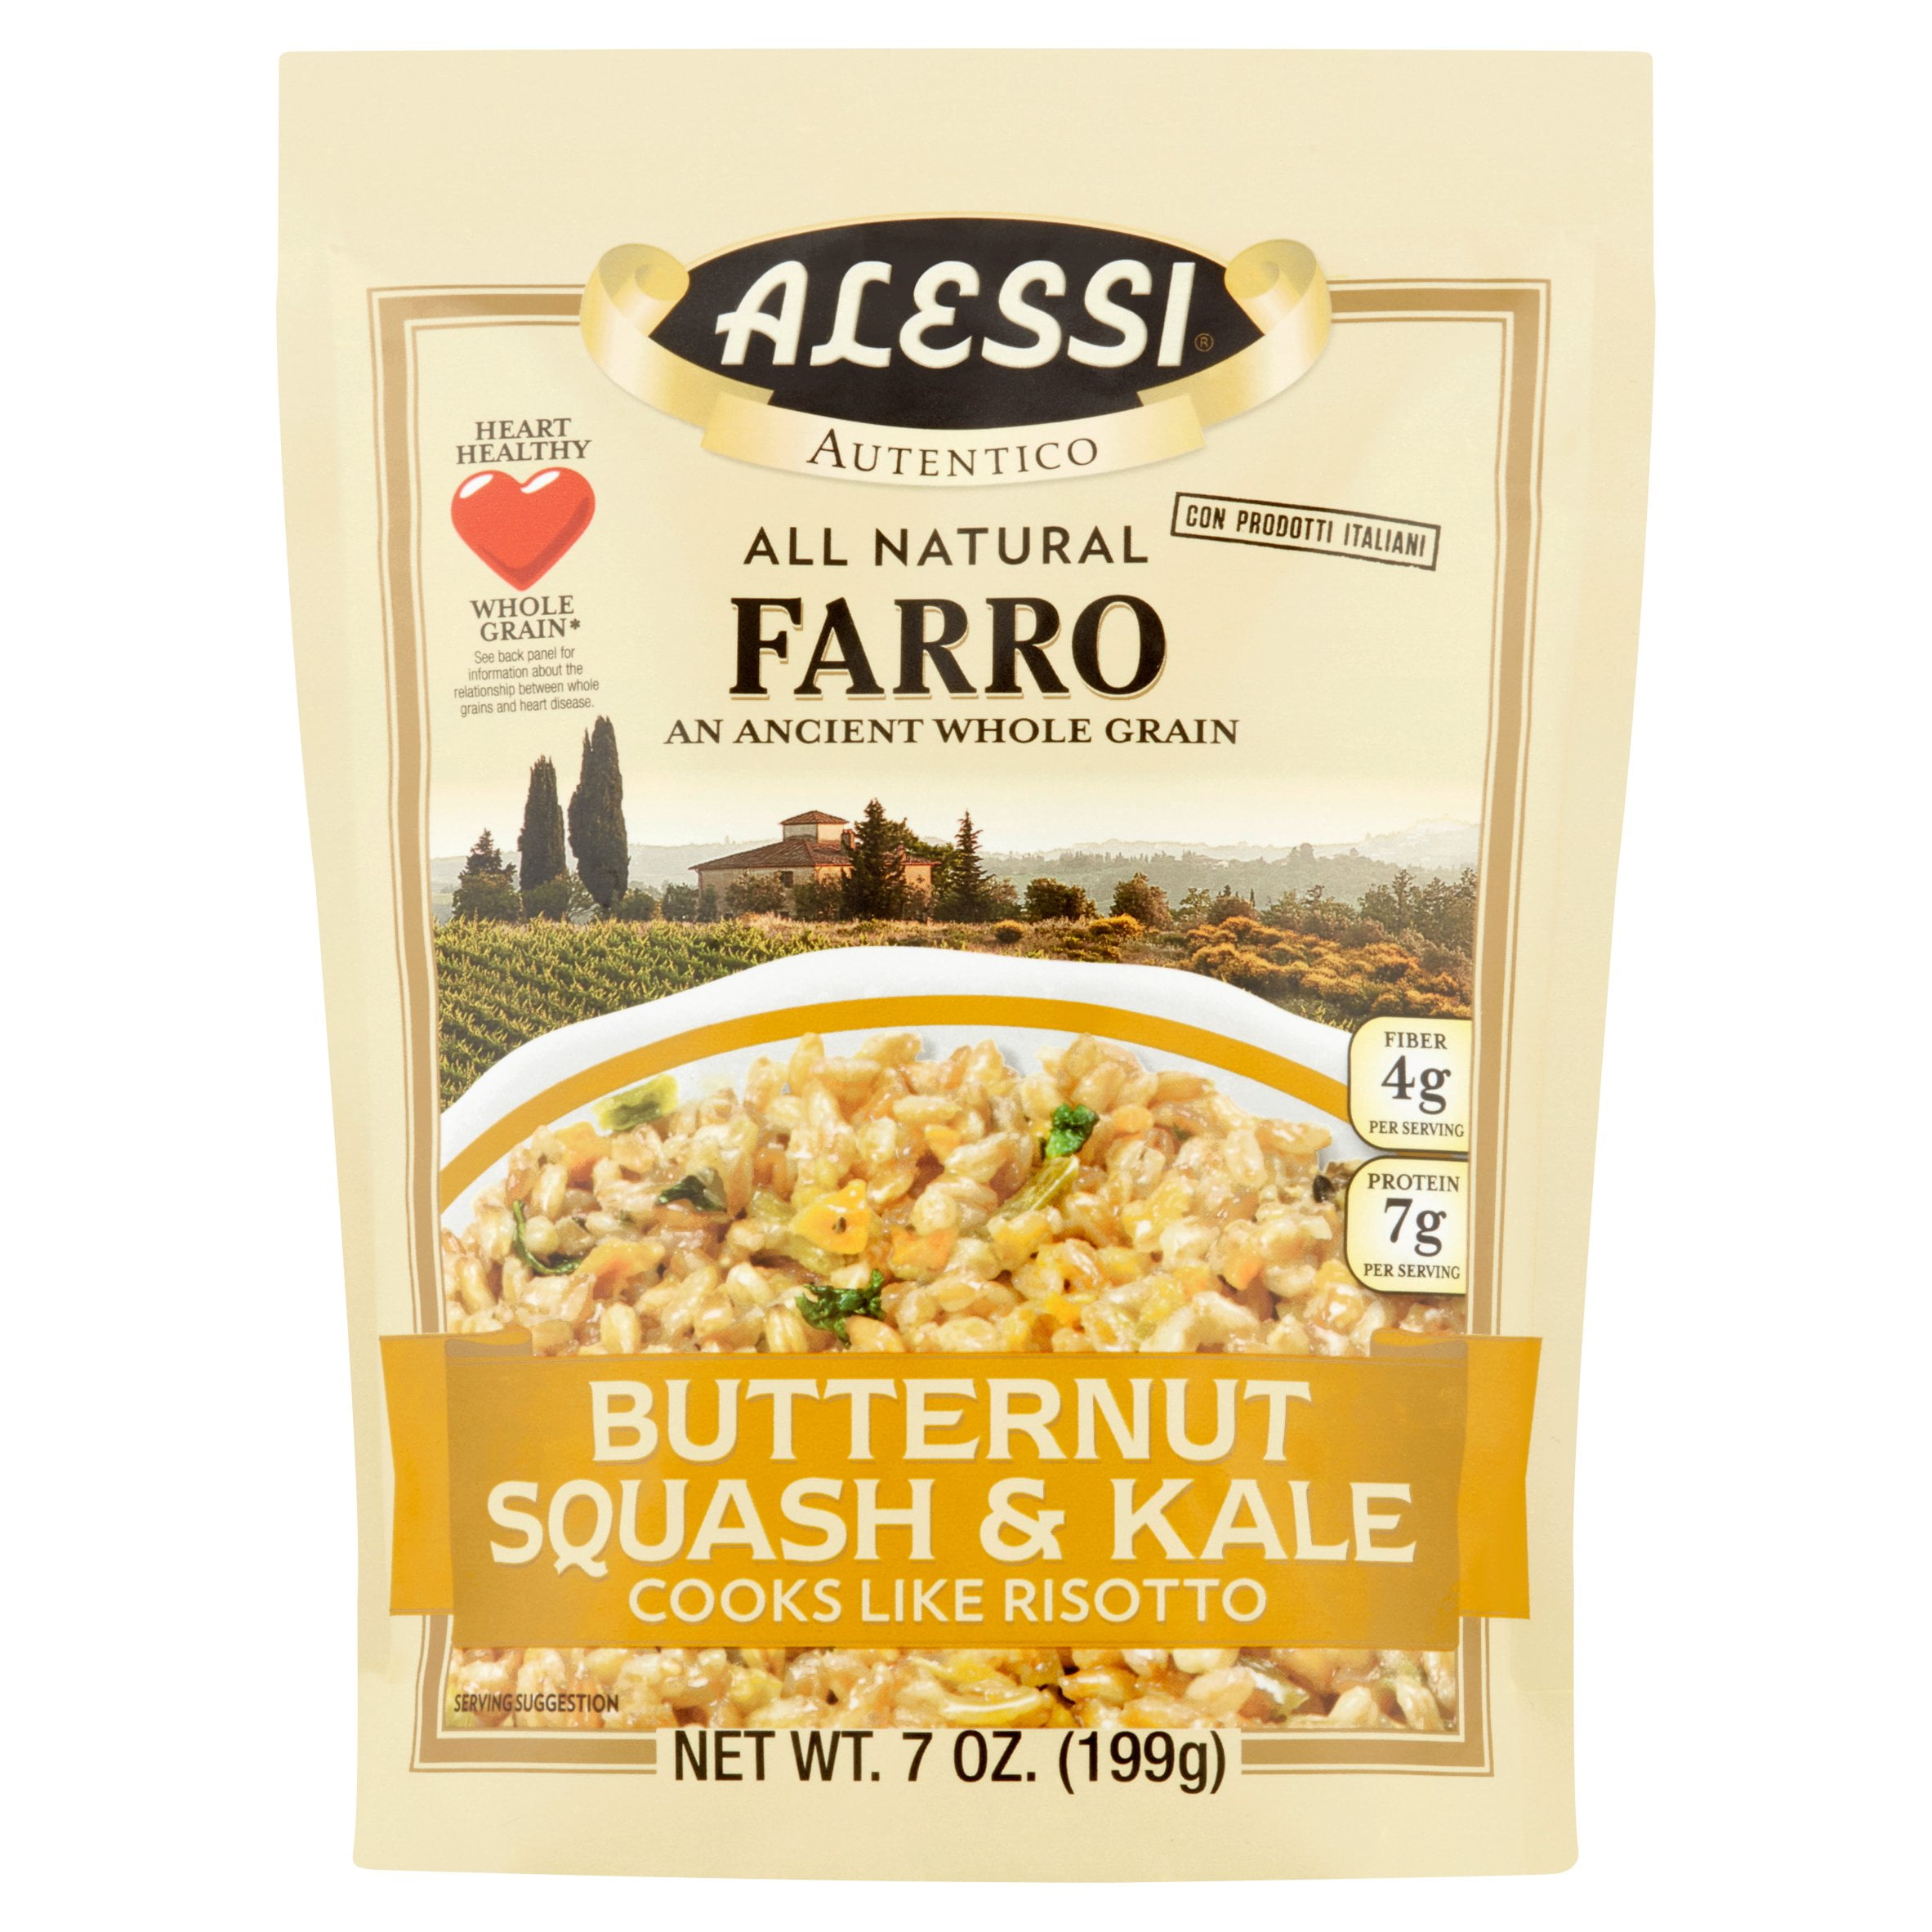 Alessi Farro With Beets Shop Rice & Grains at HEB